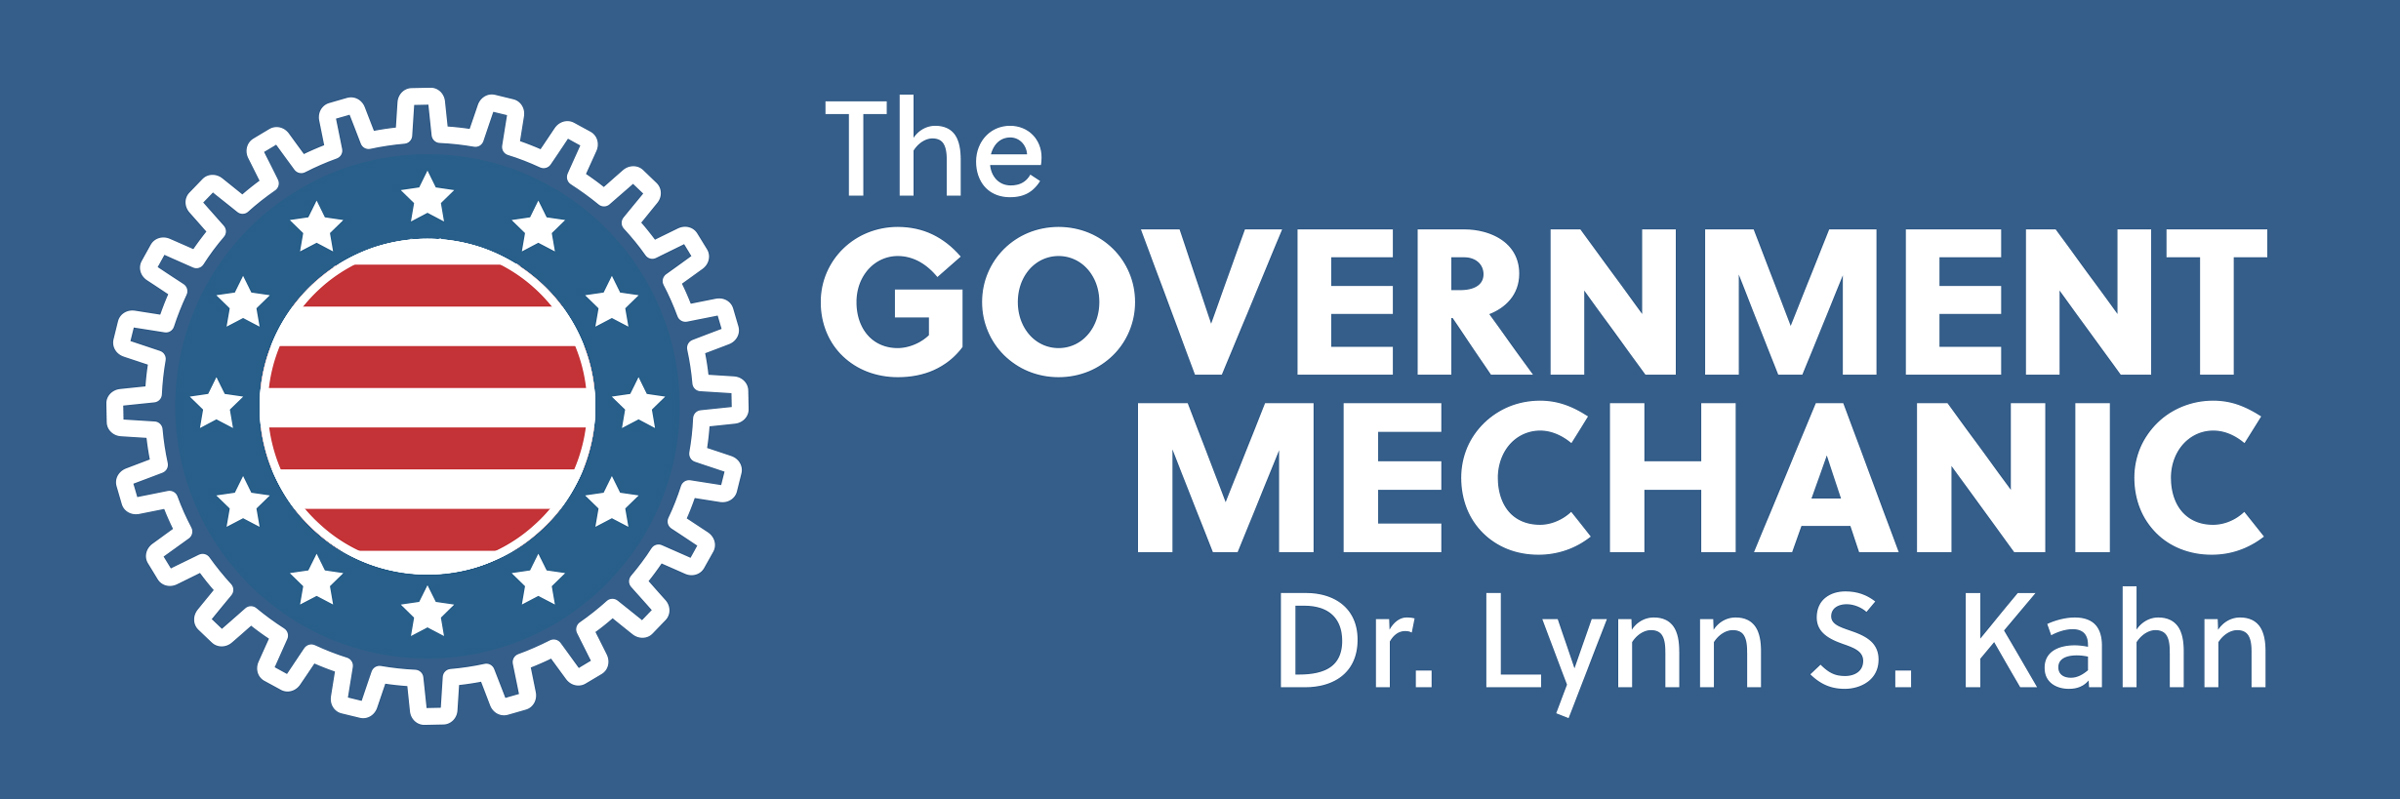 The Government Mechanic